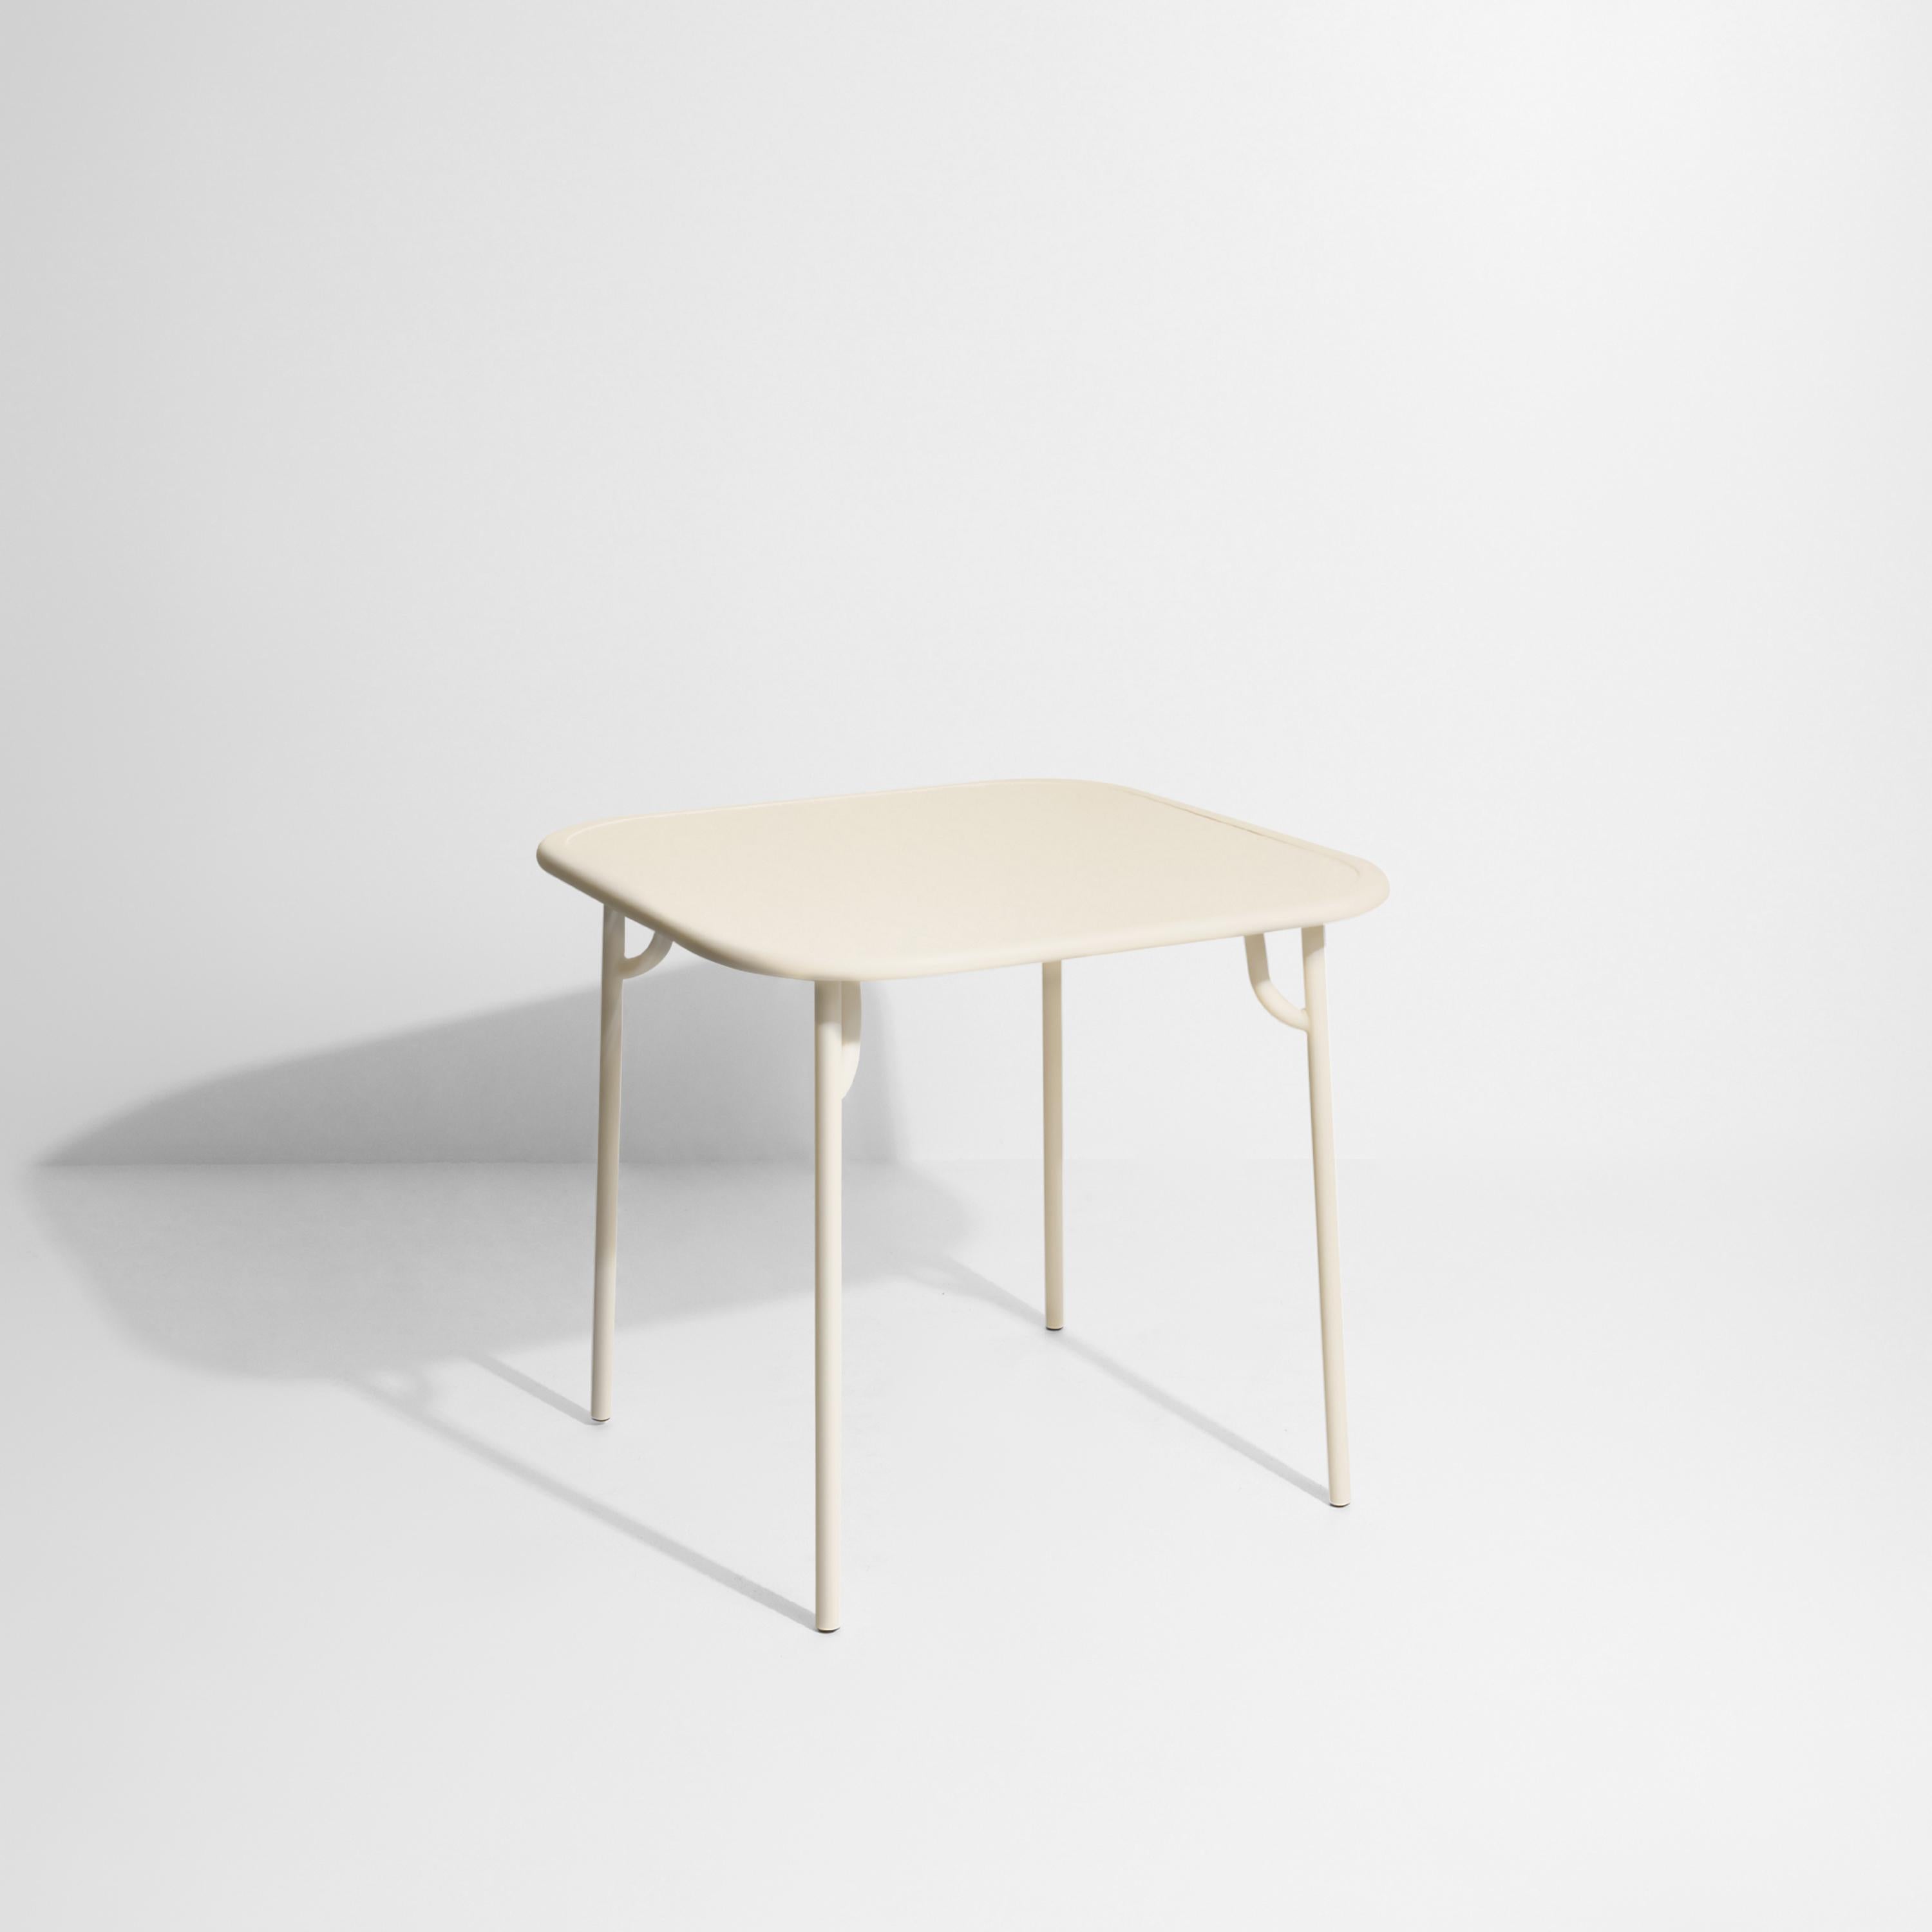 Petite Friture Week-End Plain Square Dining Table in Ivory Aluminium by Studio BrichetZiegler, 2017

The week-end collection is a full range of outdoor furniture, in aluminium grained epoxy paint, matt finish, that includes 18 functions and 8